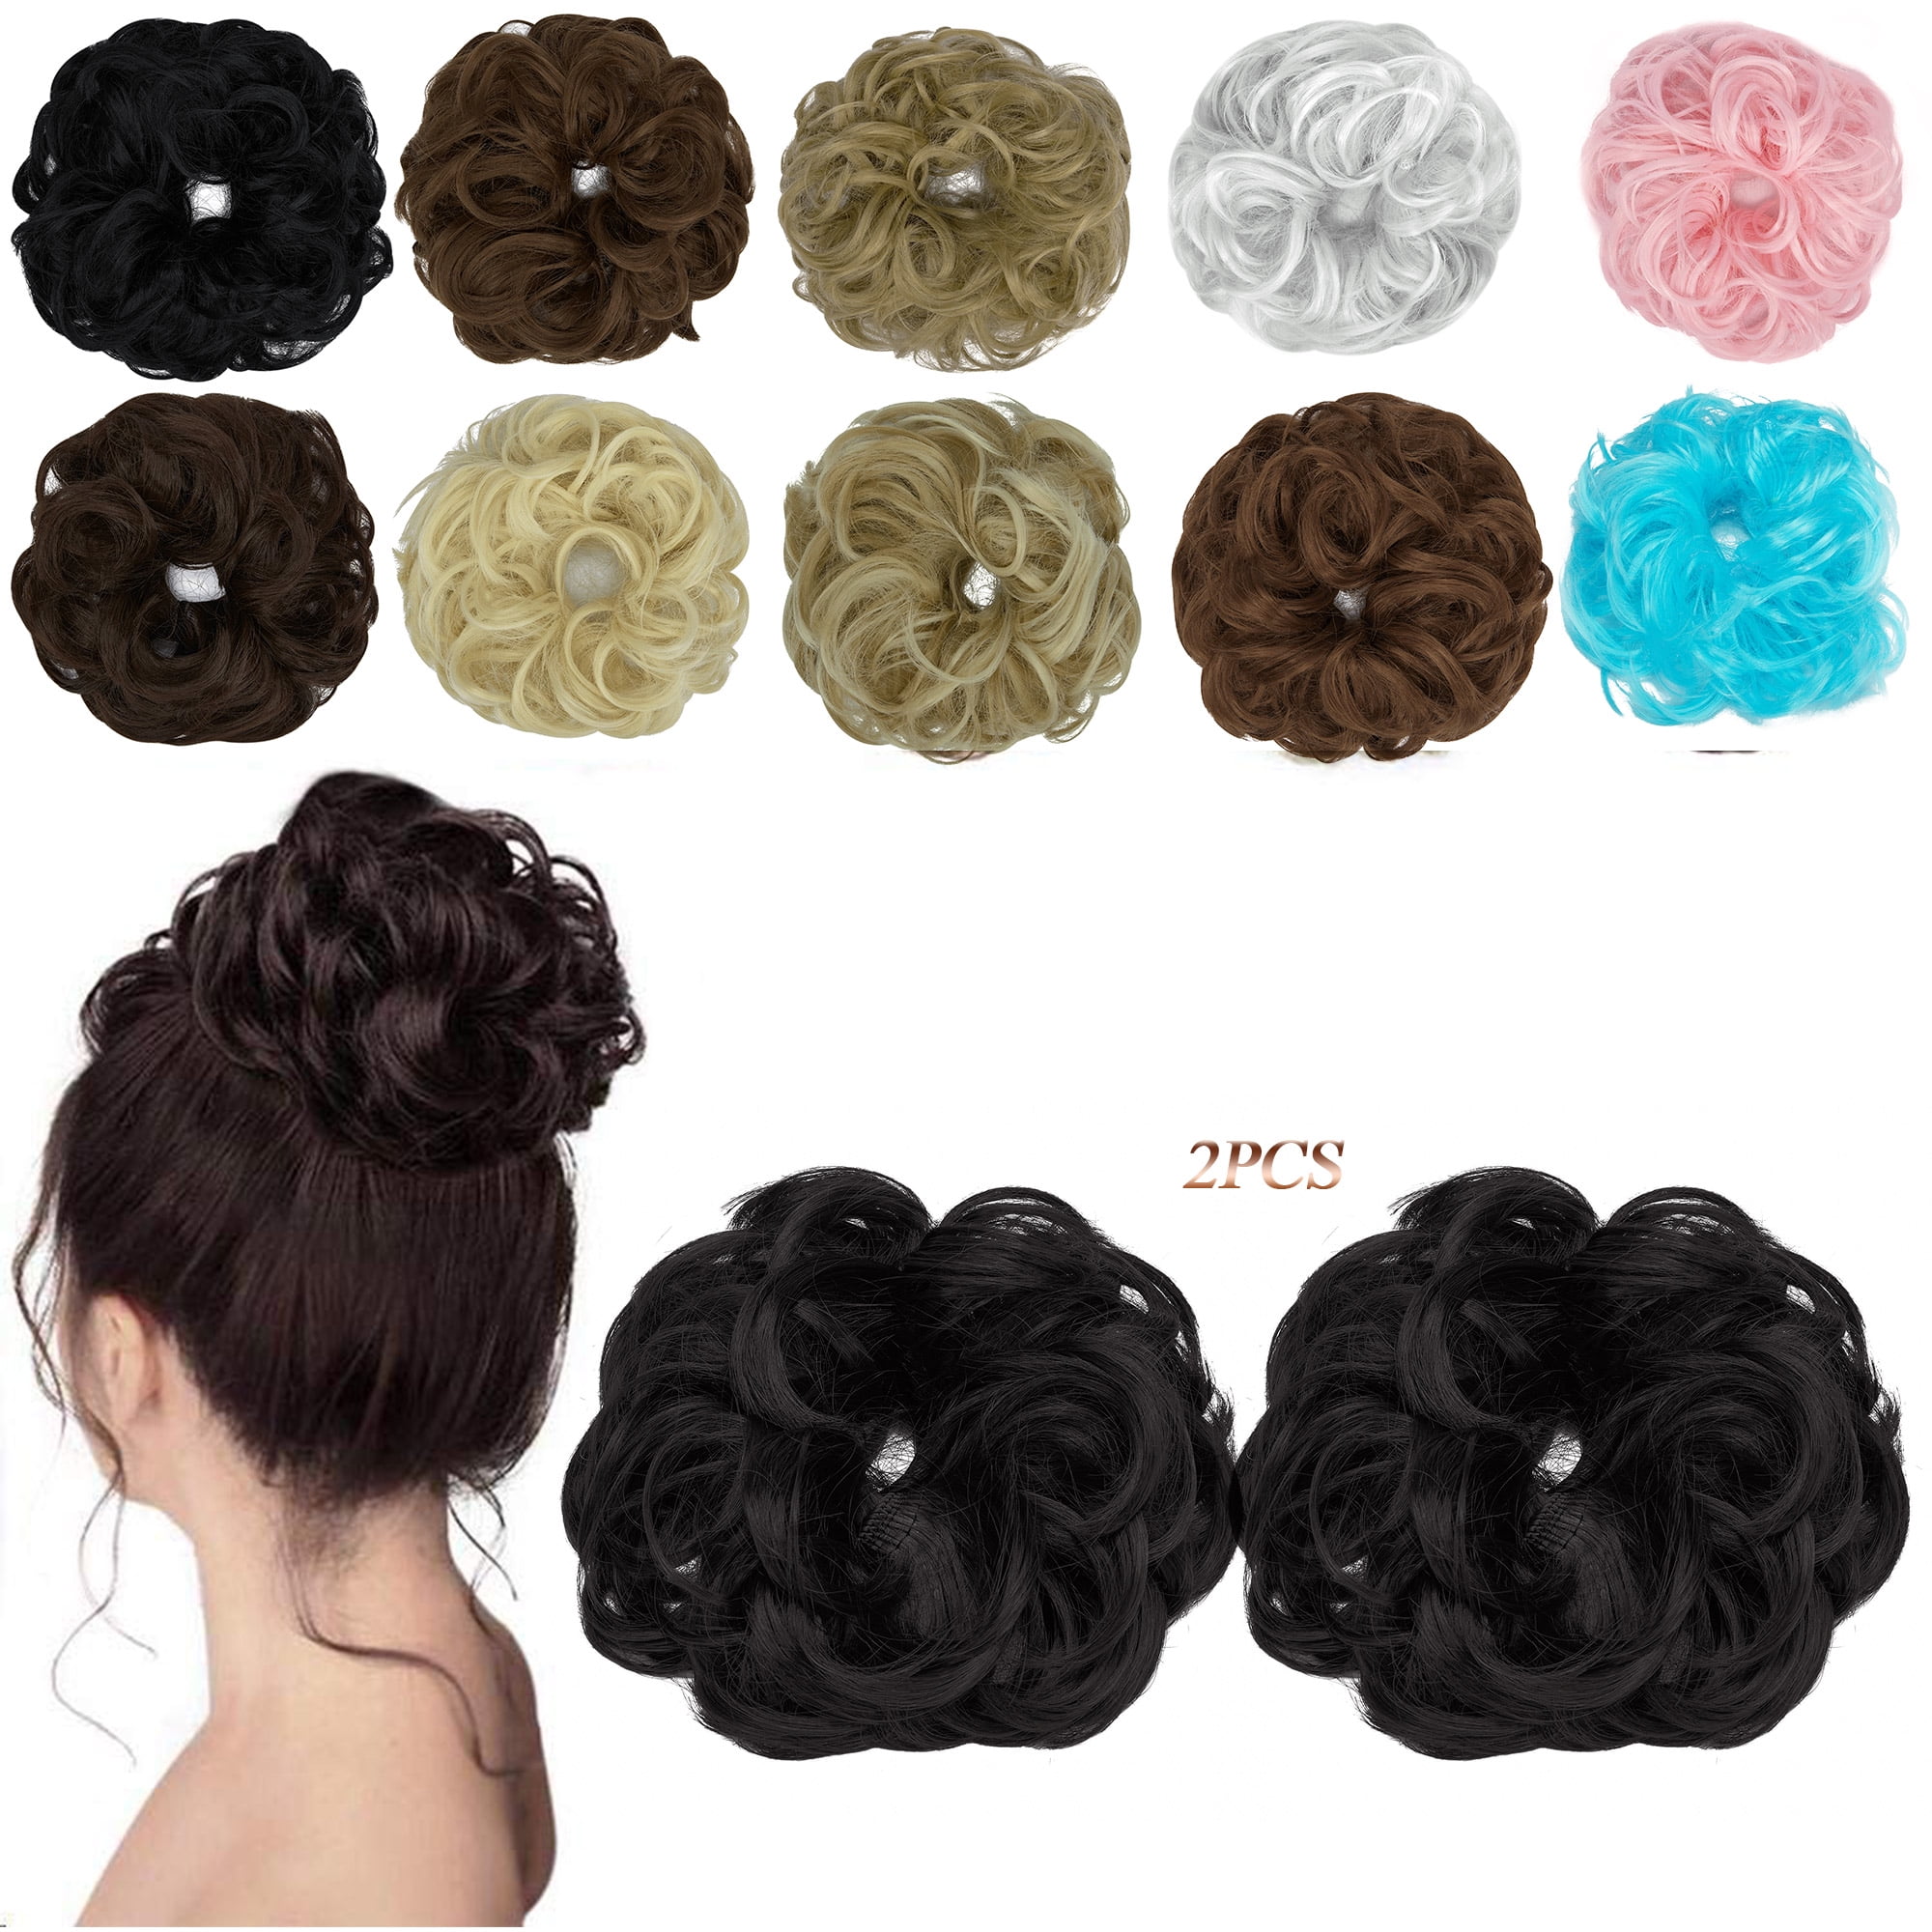 Youloveit 2PCS Messy Bun Hair Hairpiece Scrunchies Wavy Messy Synthetic  Chignon Hairpiece for Women Hair pieceUpdo Bun Extensions 